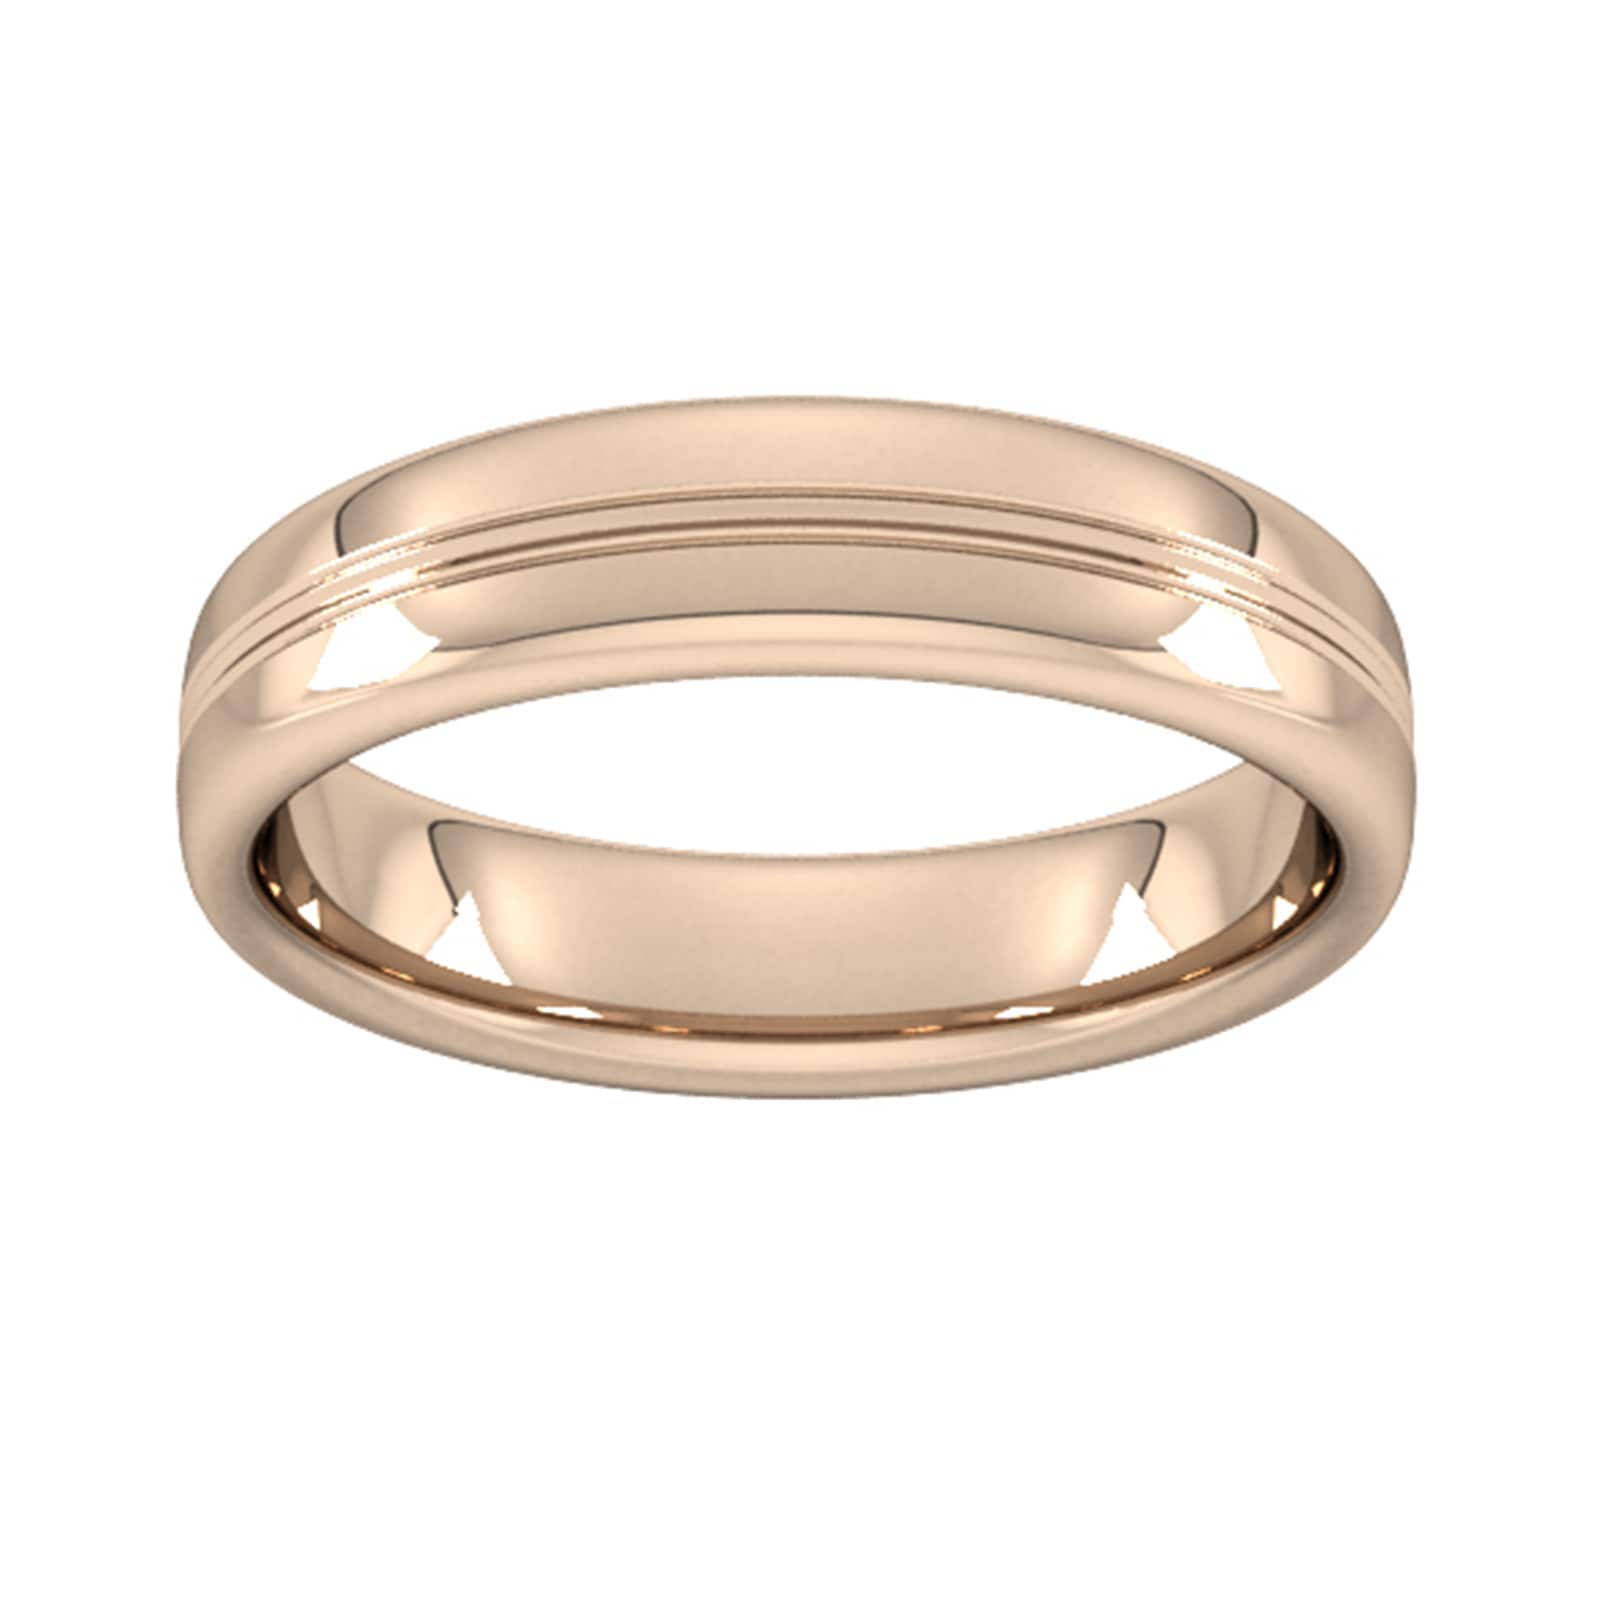 5mm Slight Court Standard Grooved Polished Finish Wedding Ring In 9 Carat Rose Gold - Ring Size S